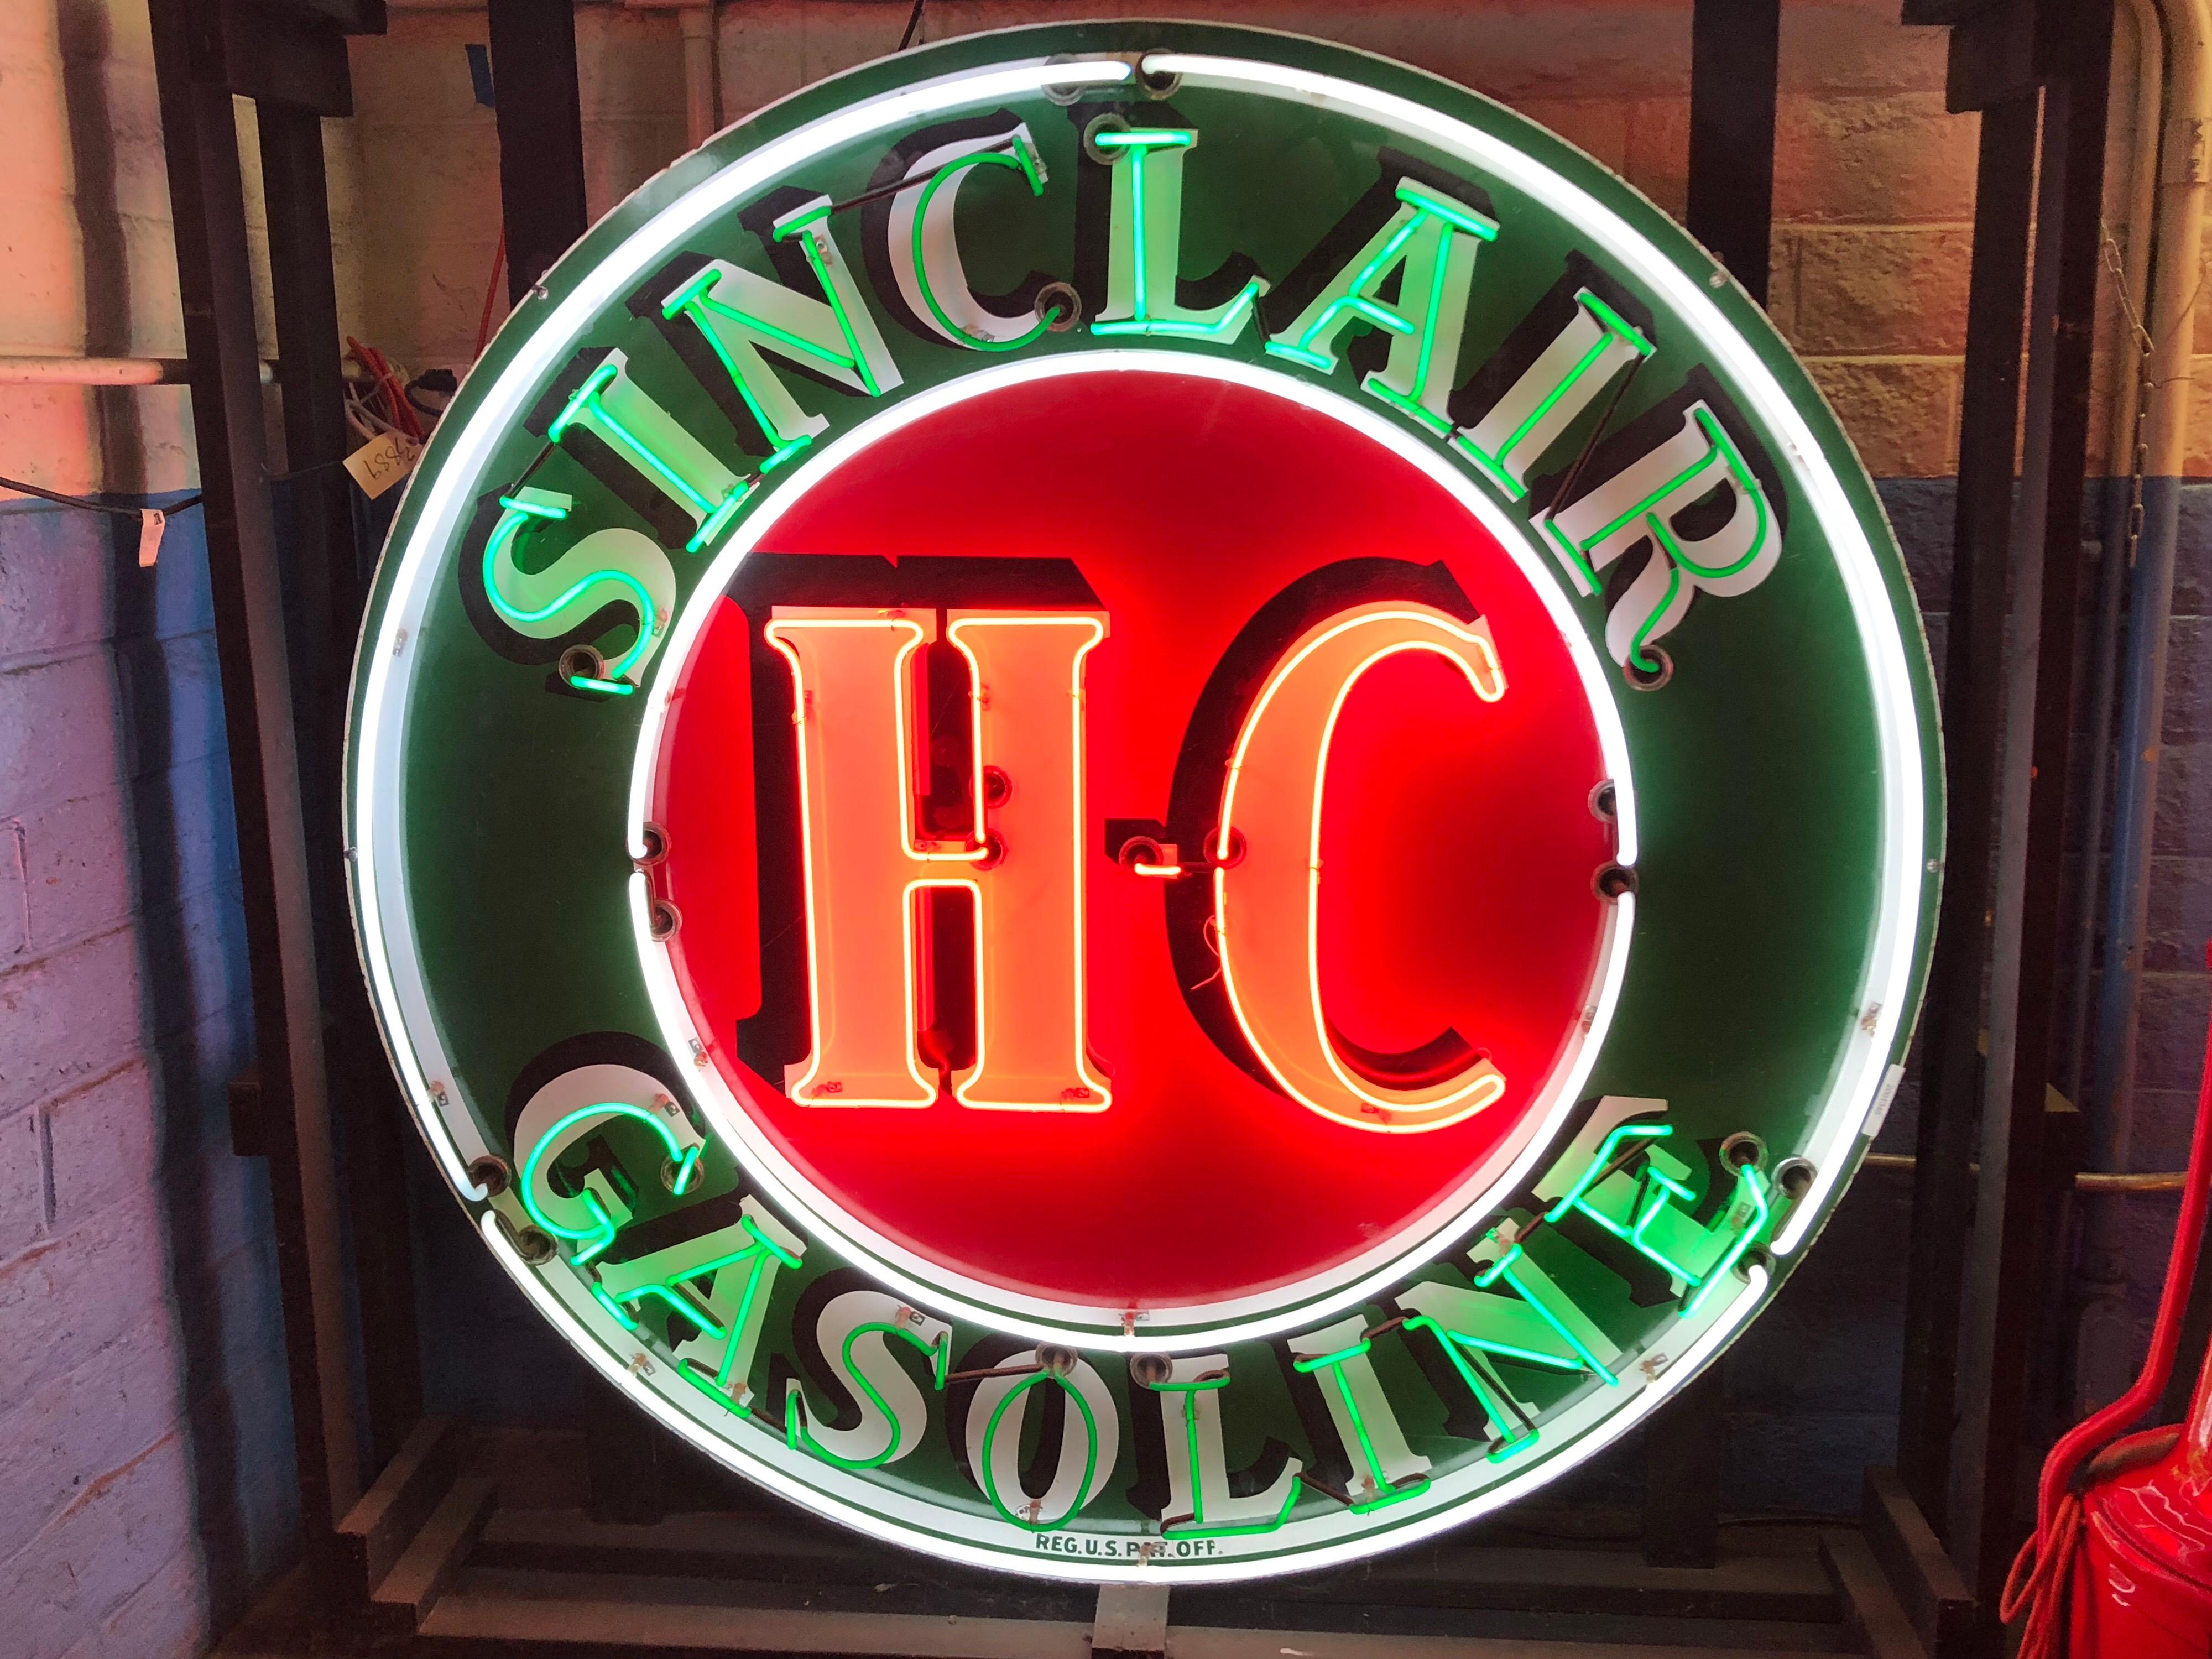 Sinclair HC Gasoline Neon Advertising Sign, 1958 For Sale 3